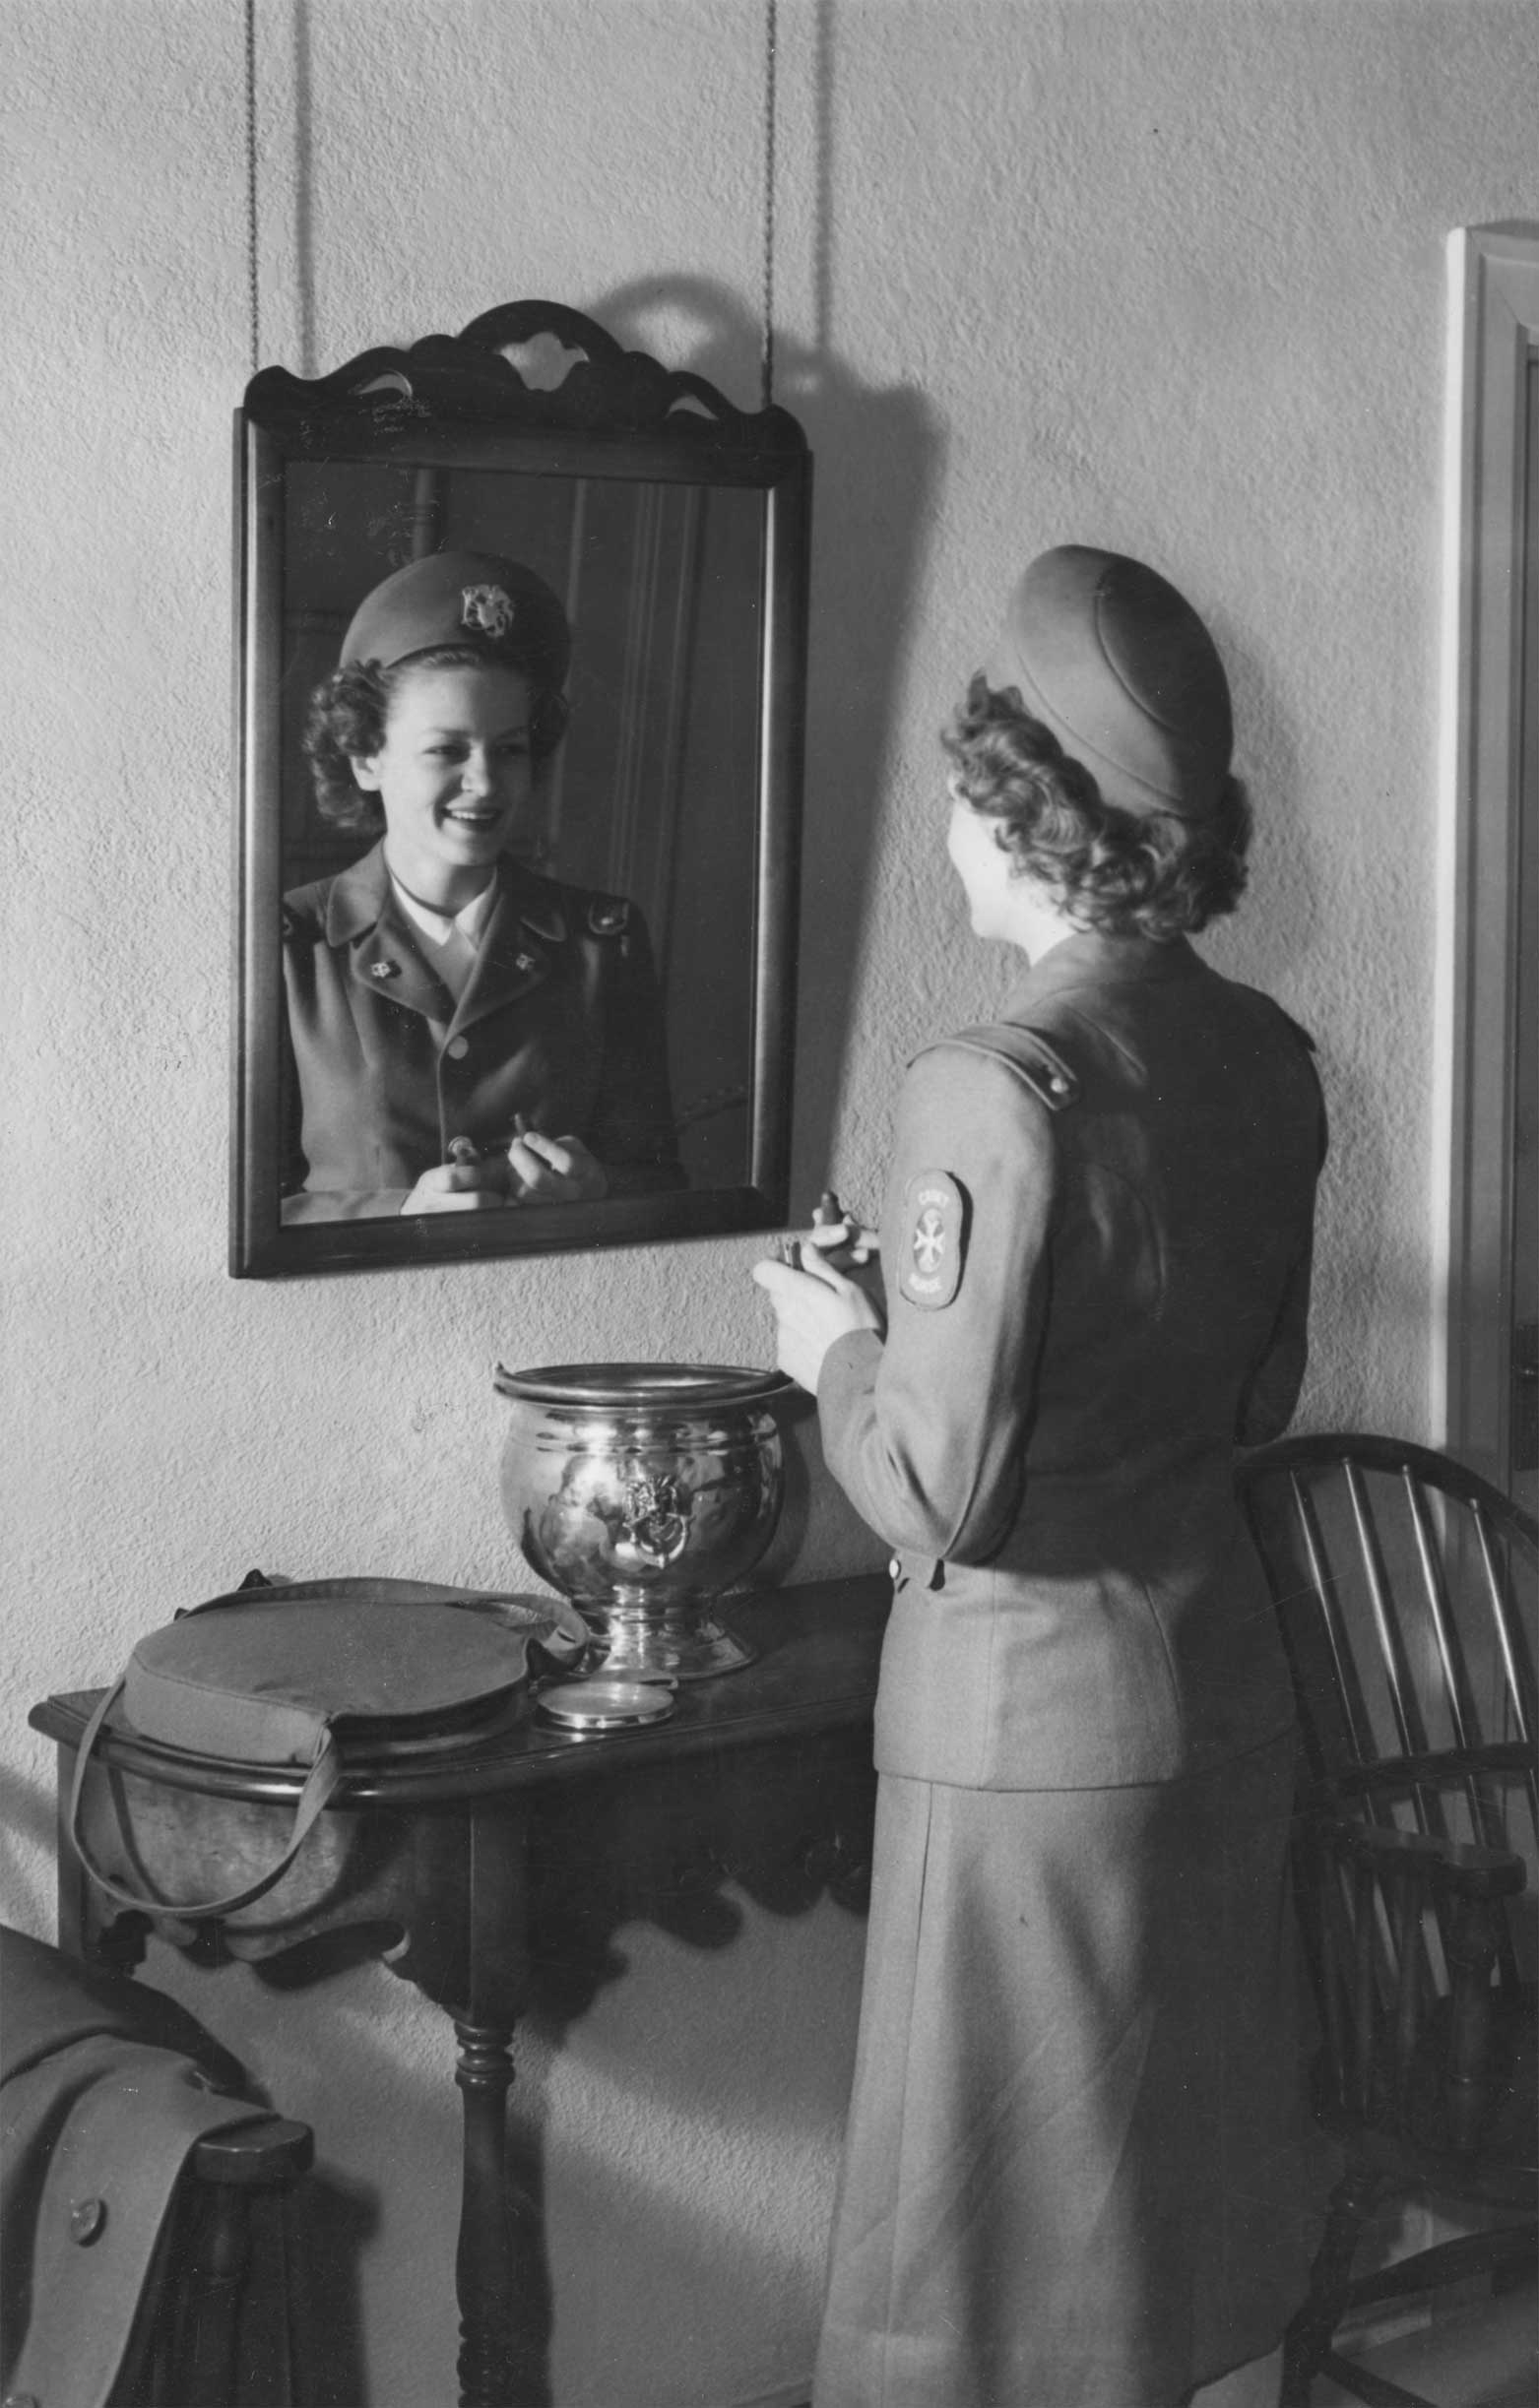 Nurse in a military uniform looking at herself in a mirror.